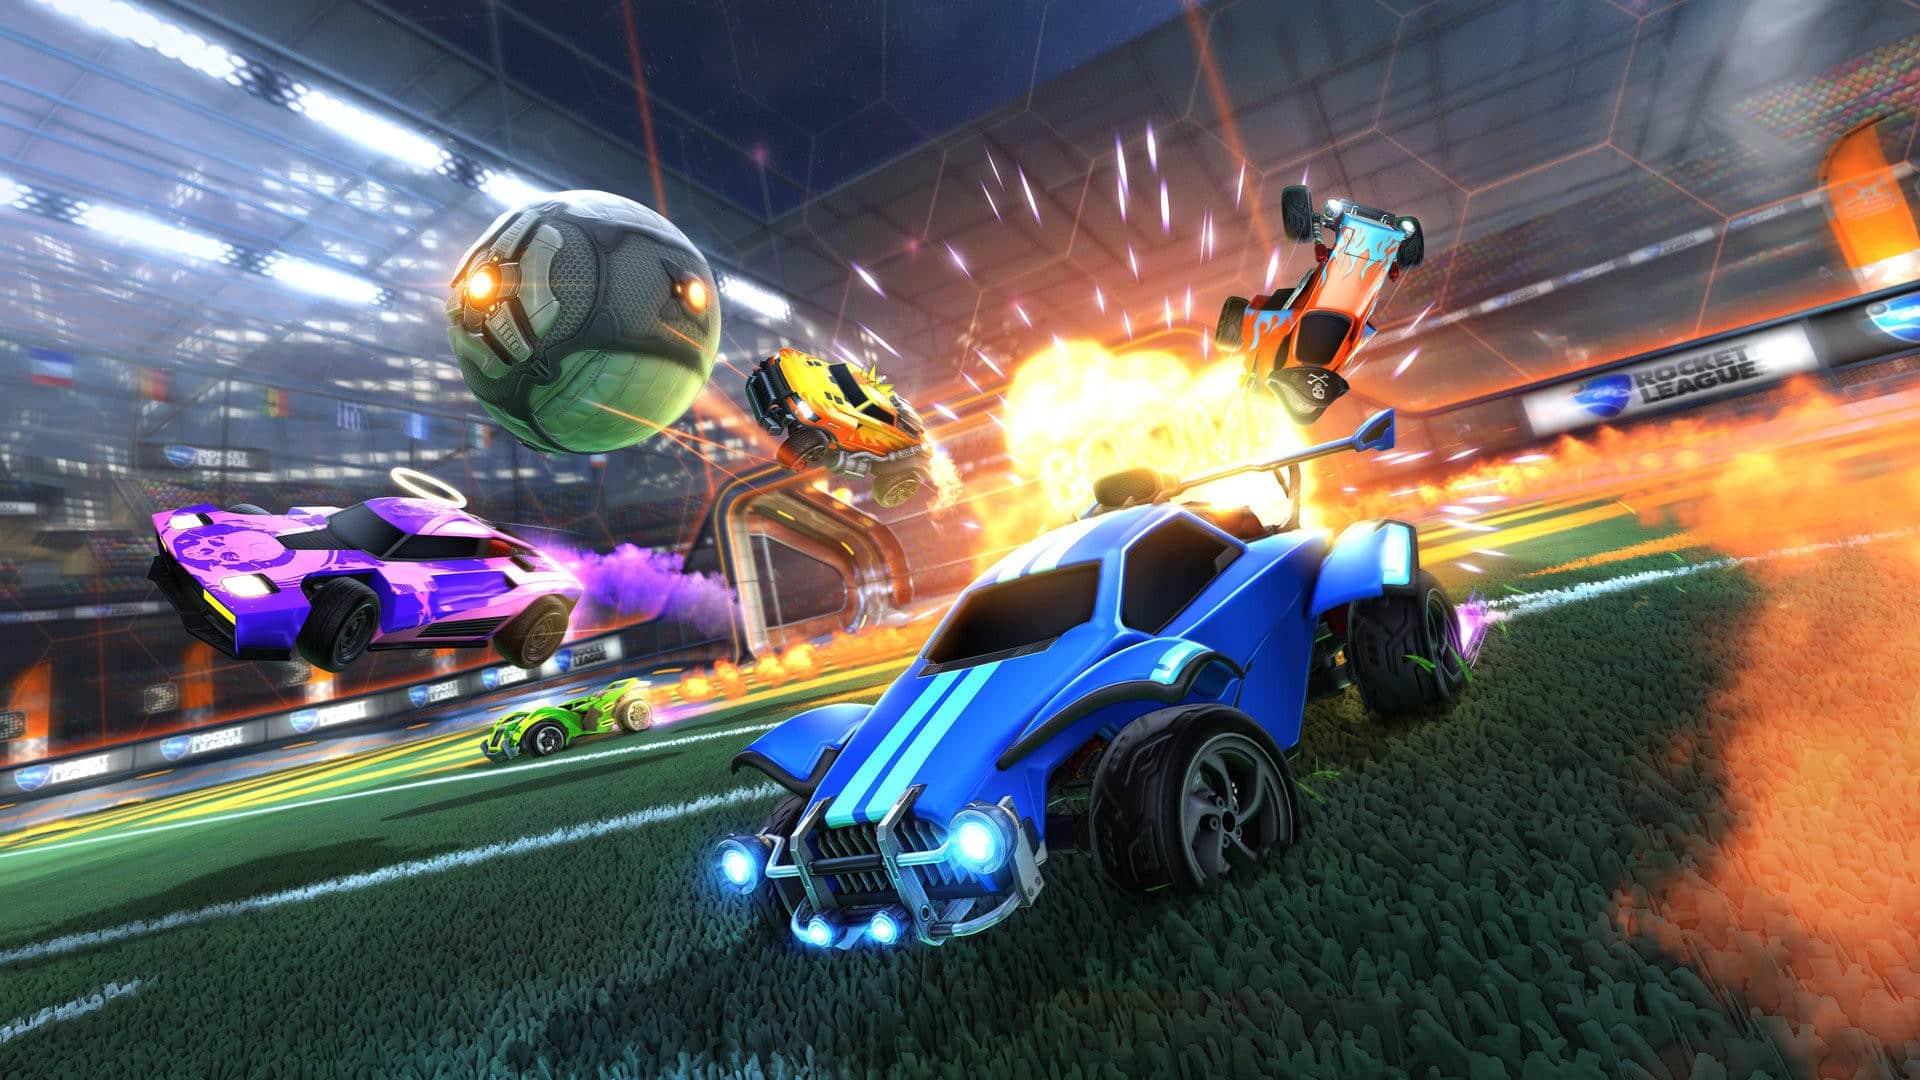 Rocket League Free-to-play